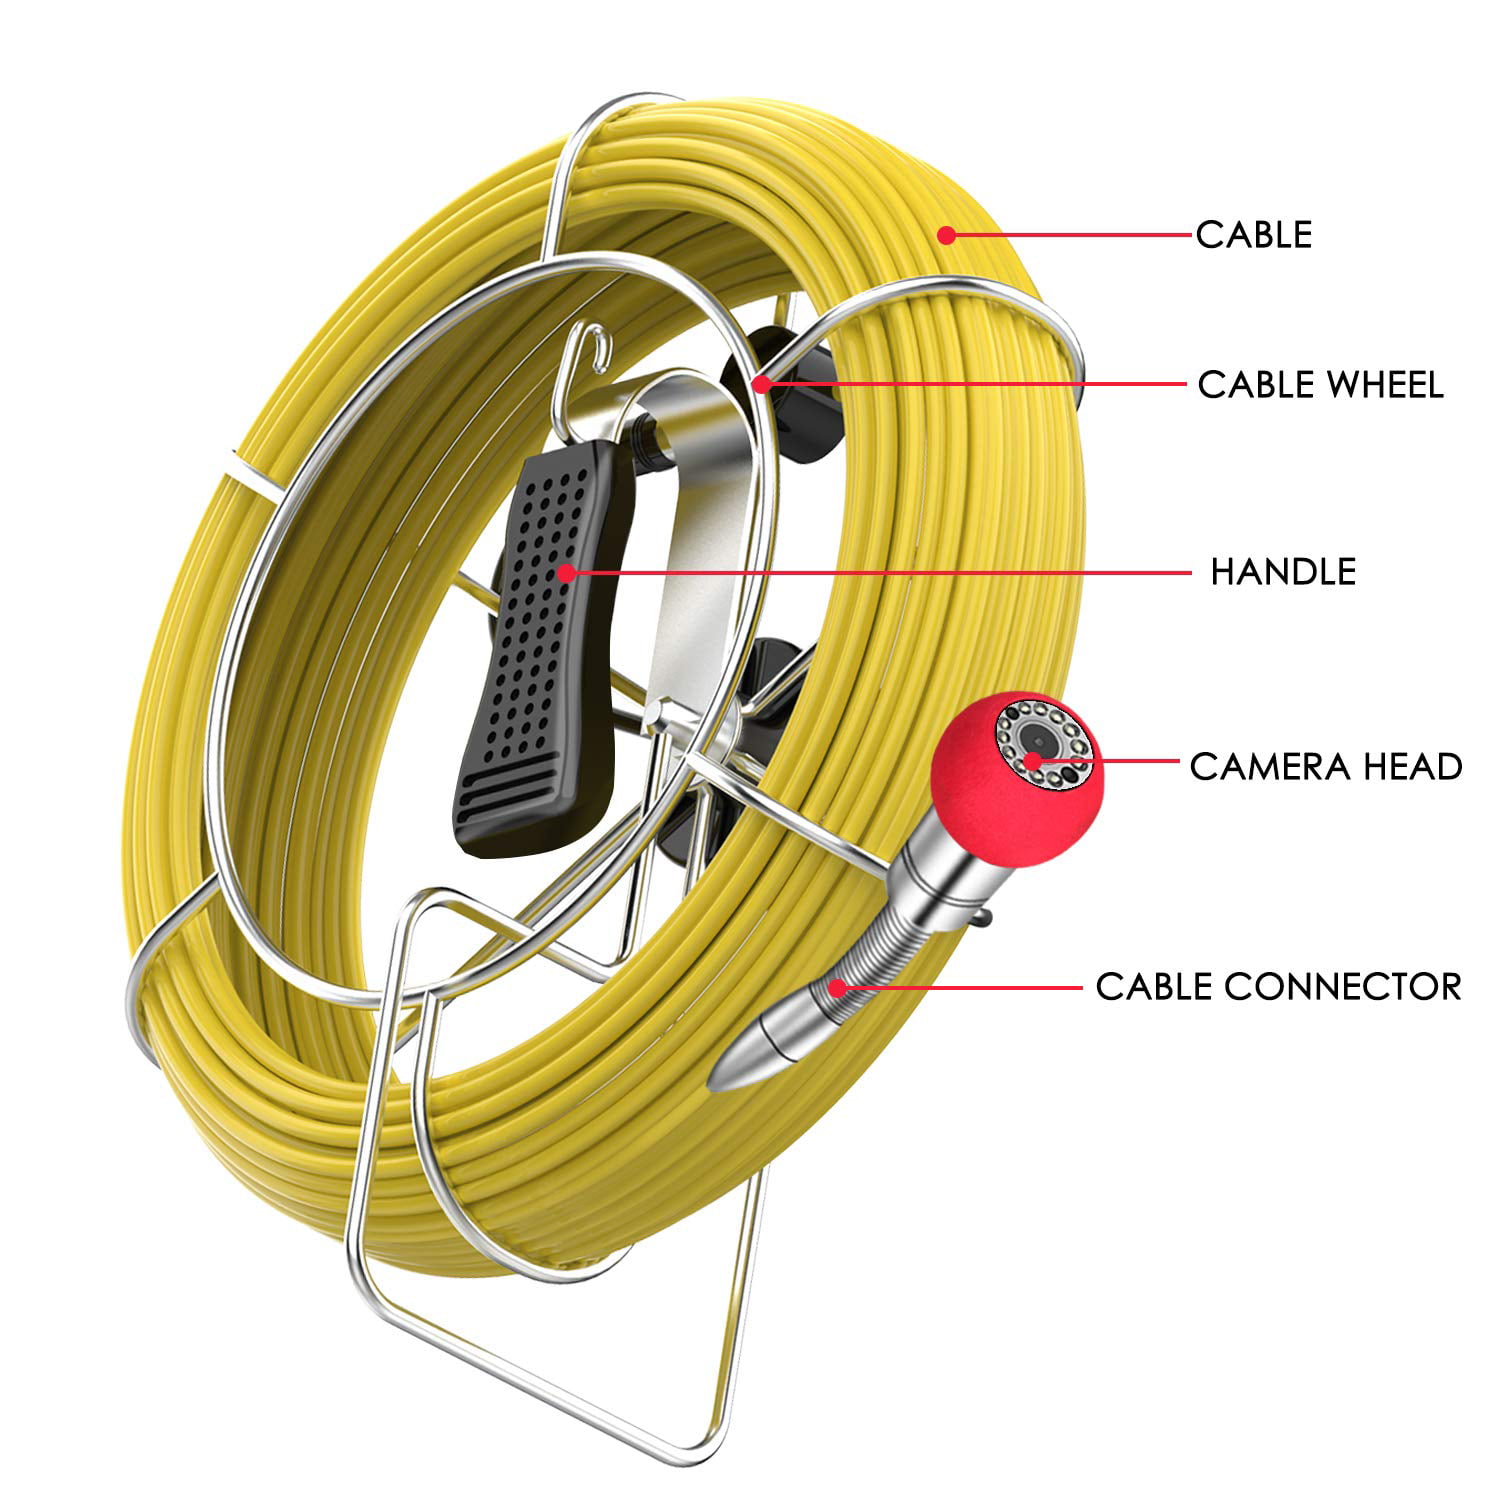 50M Length Pipe Inspection Camera Cable with Handle System Sewer Drain Pipeline 